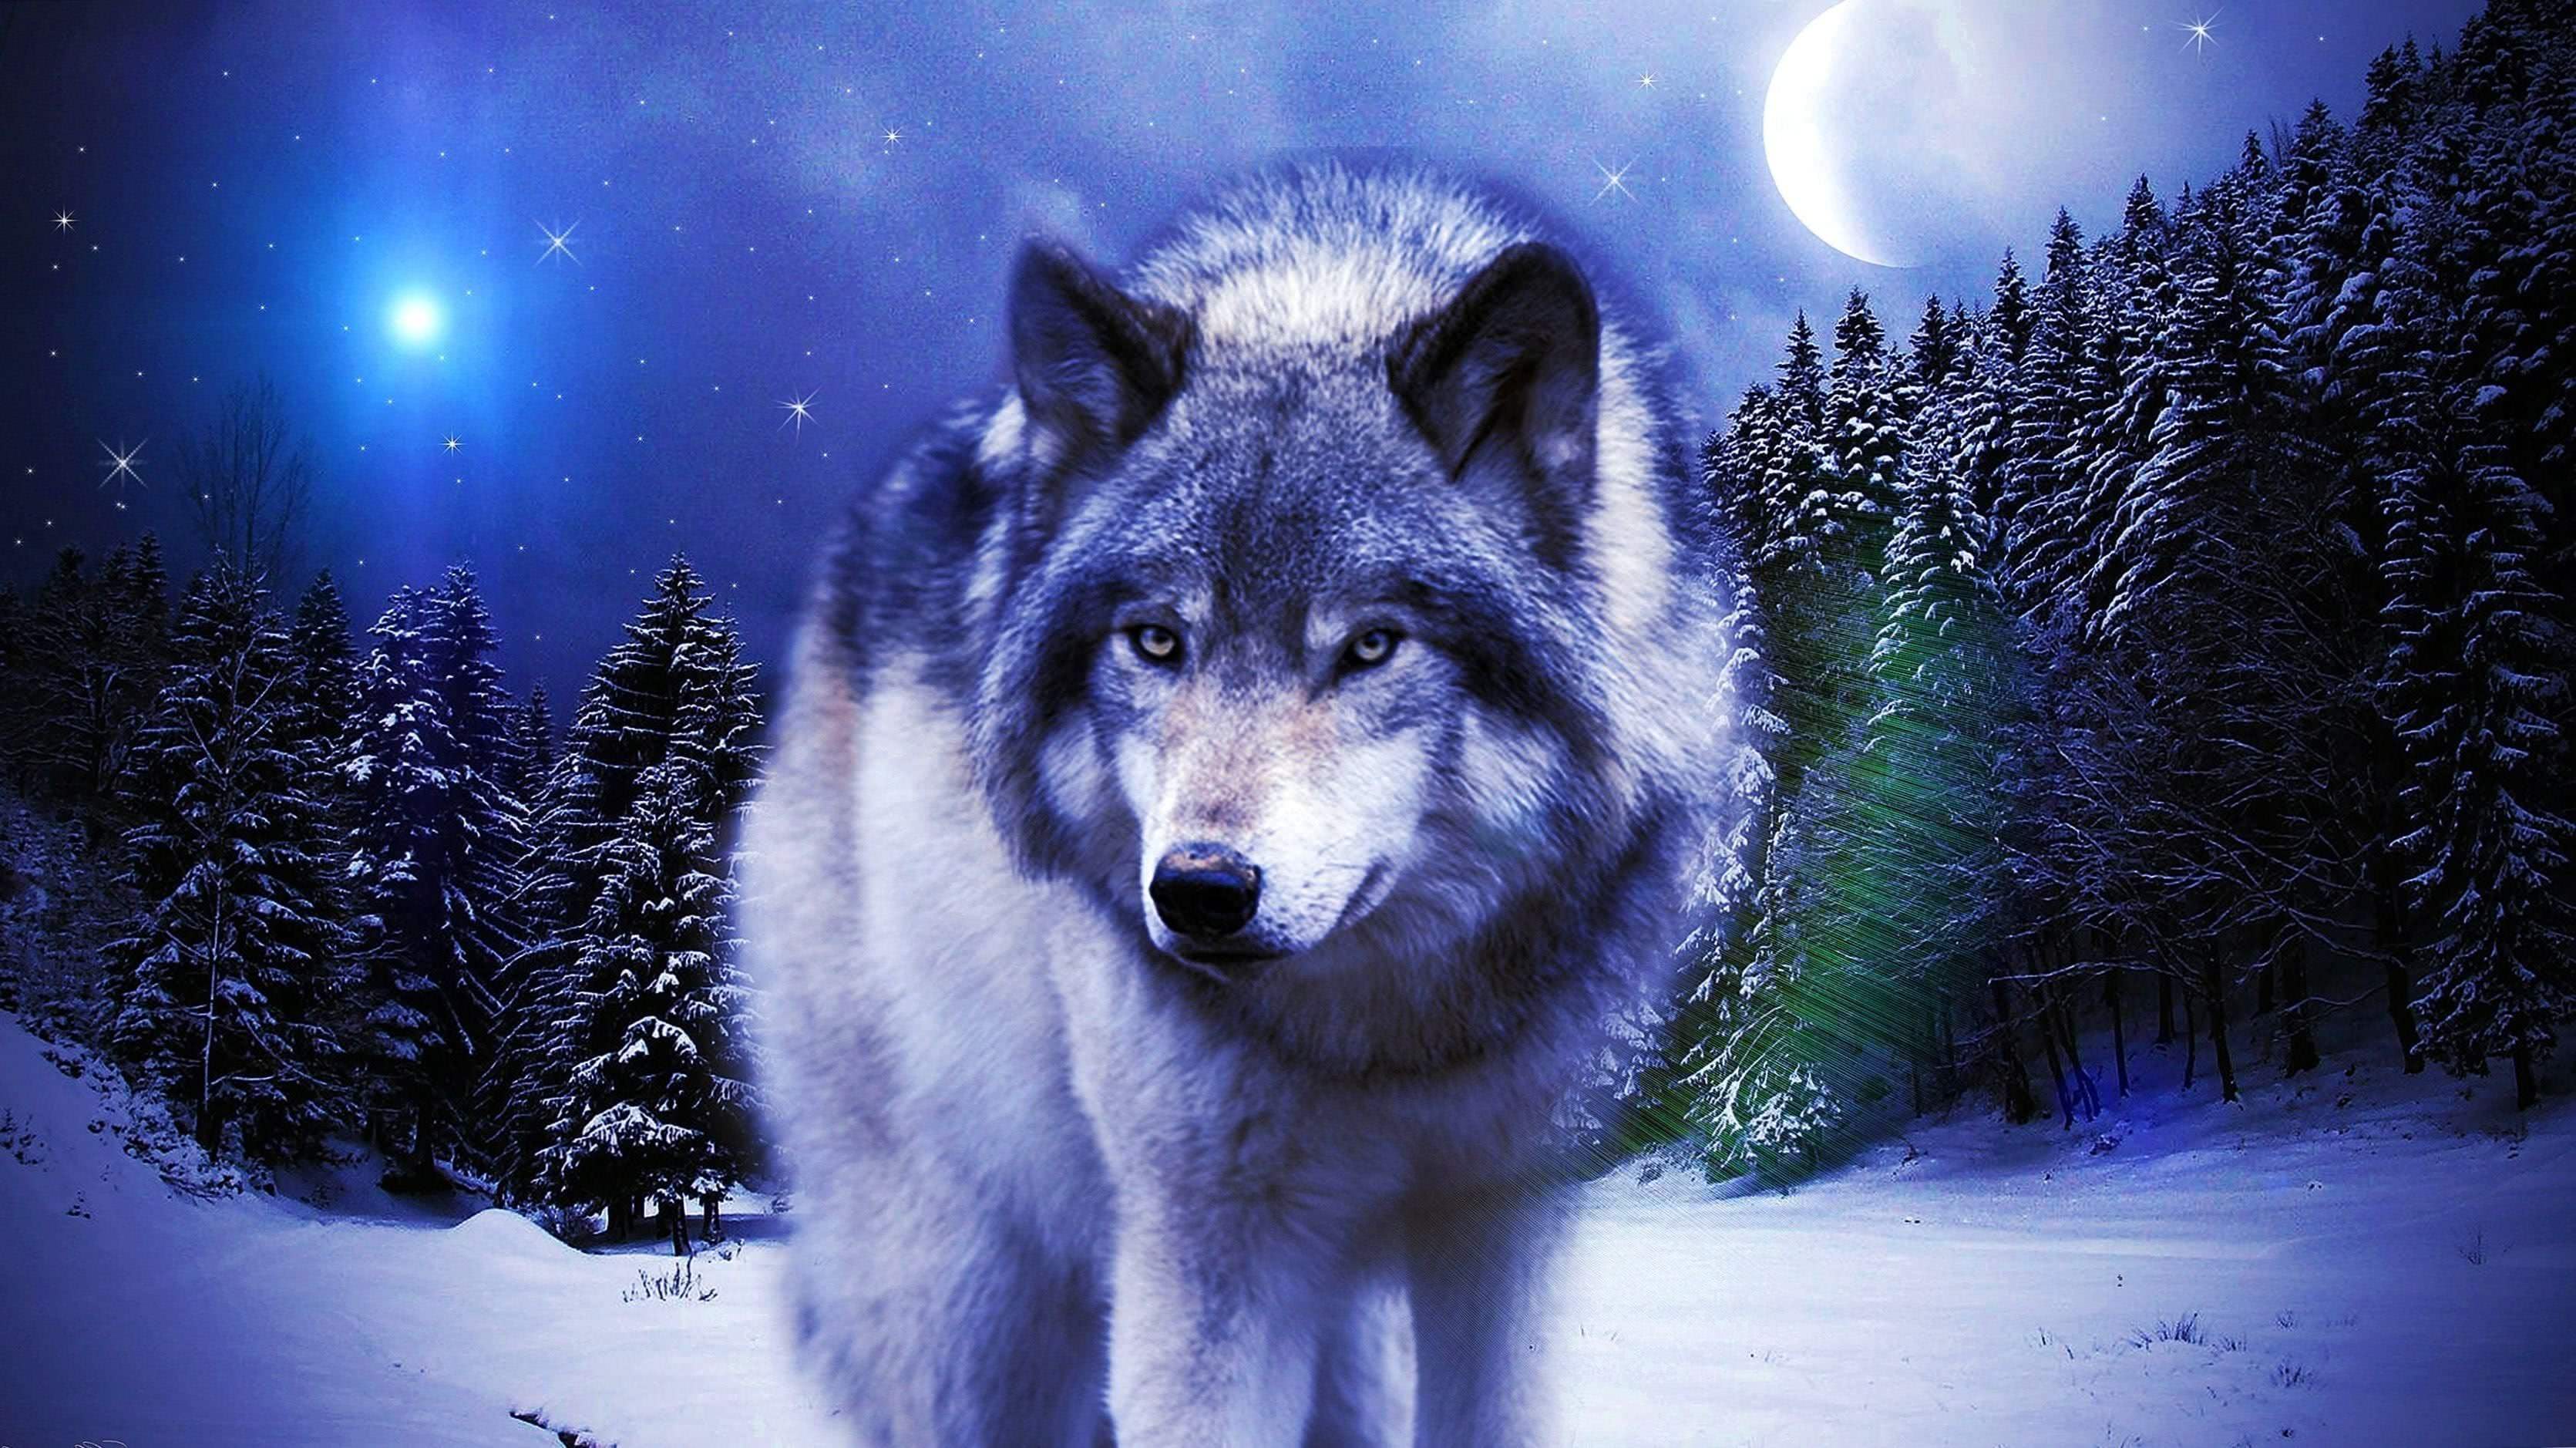 Wolf Images HD Wallpaper Image 1